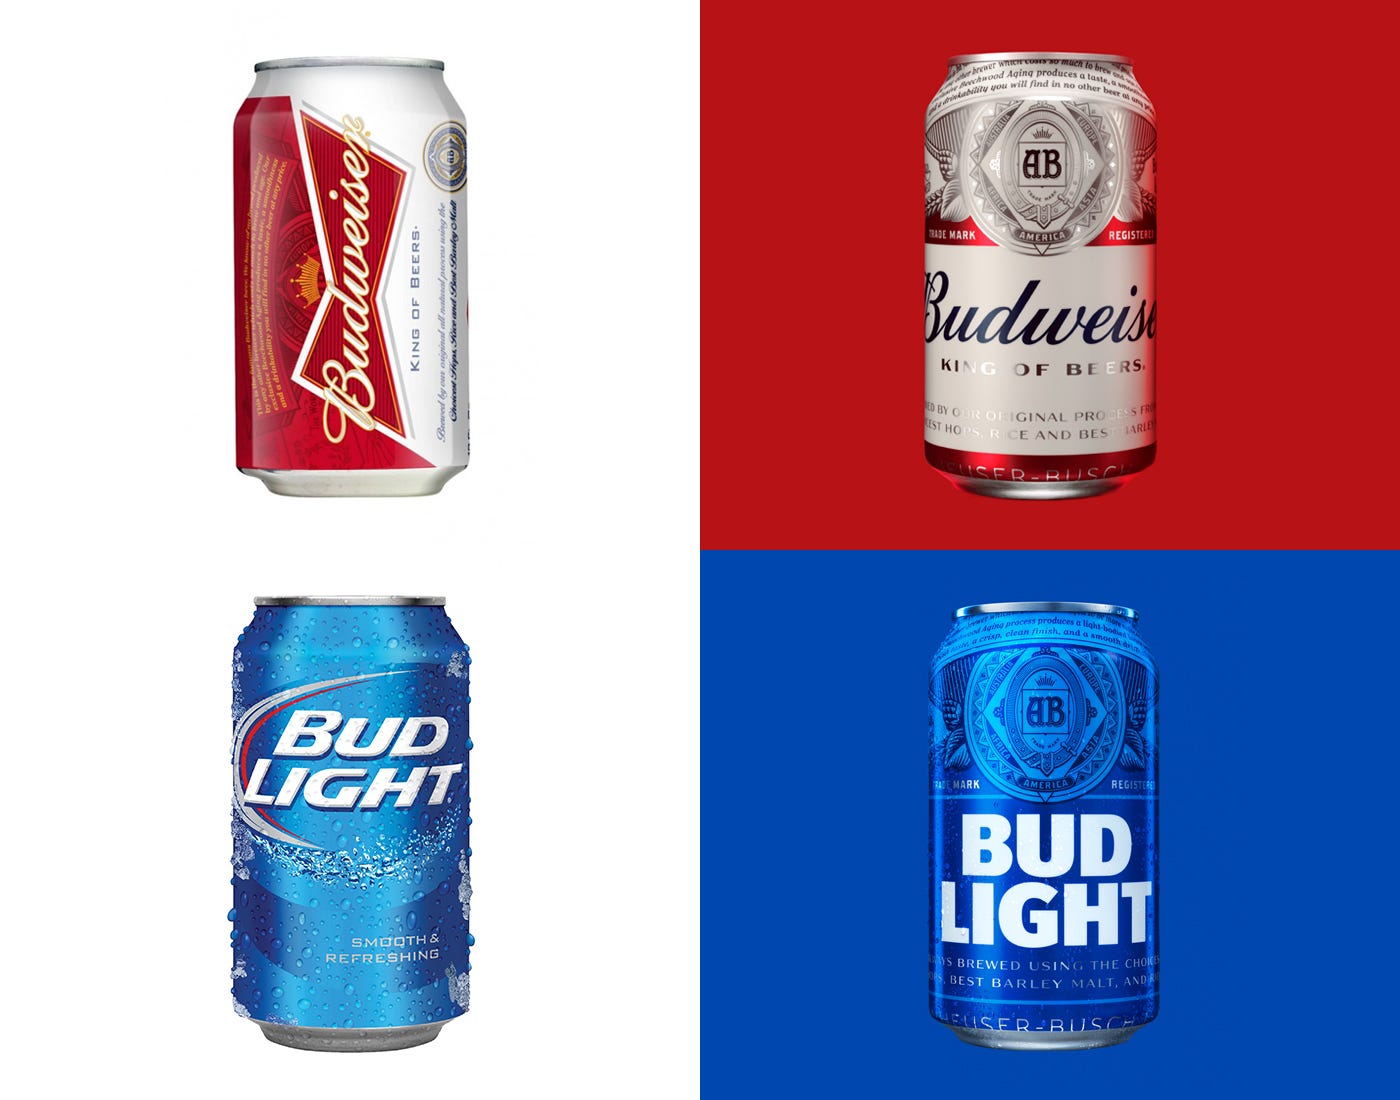 Bud Light Controversy Illustrates Heightened Risks for Brands